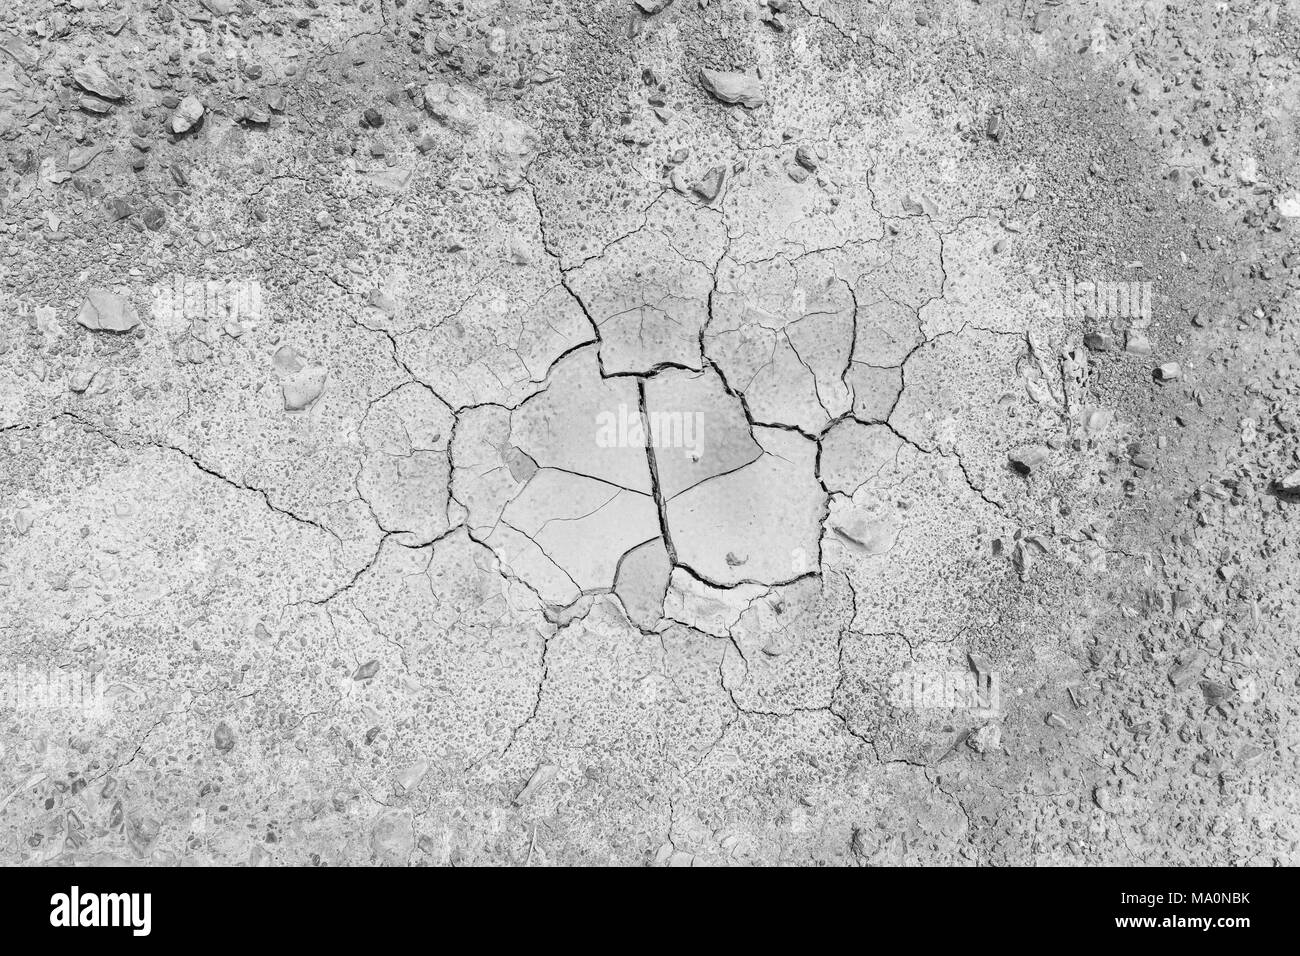 Stones and dry and cracked soil ground during drought, viewed from above in black and white. Stock Photo